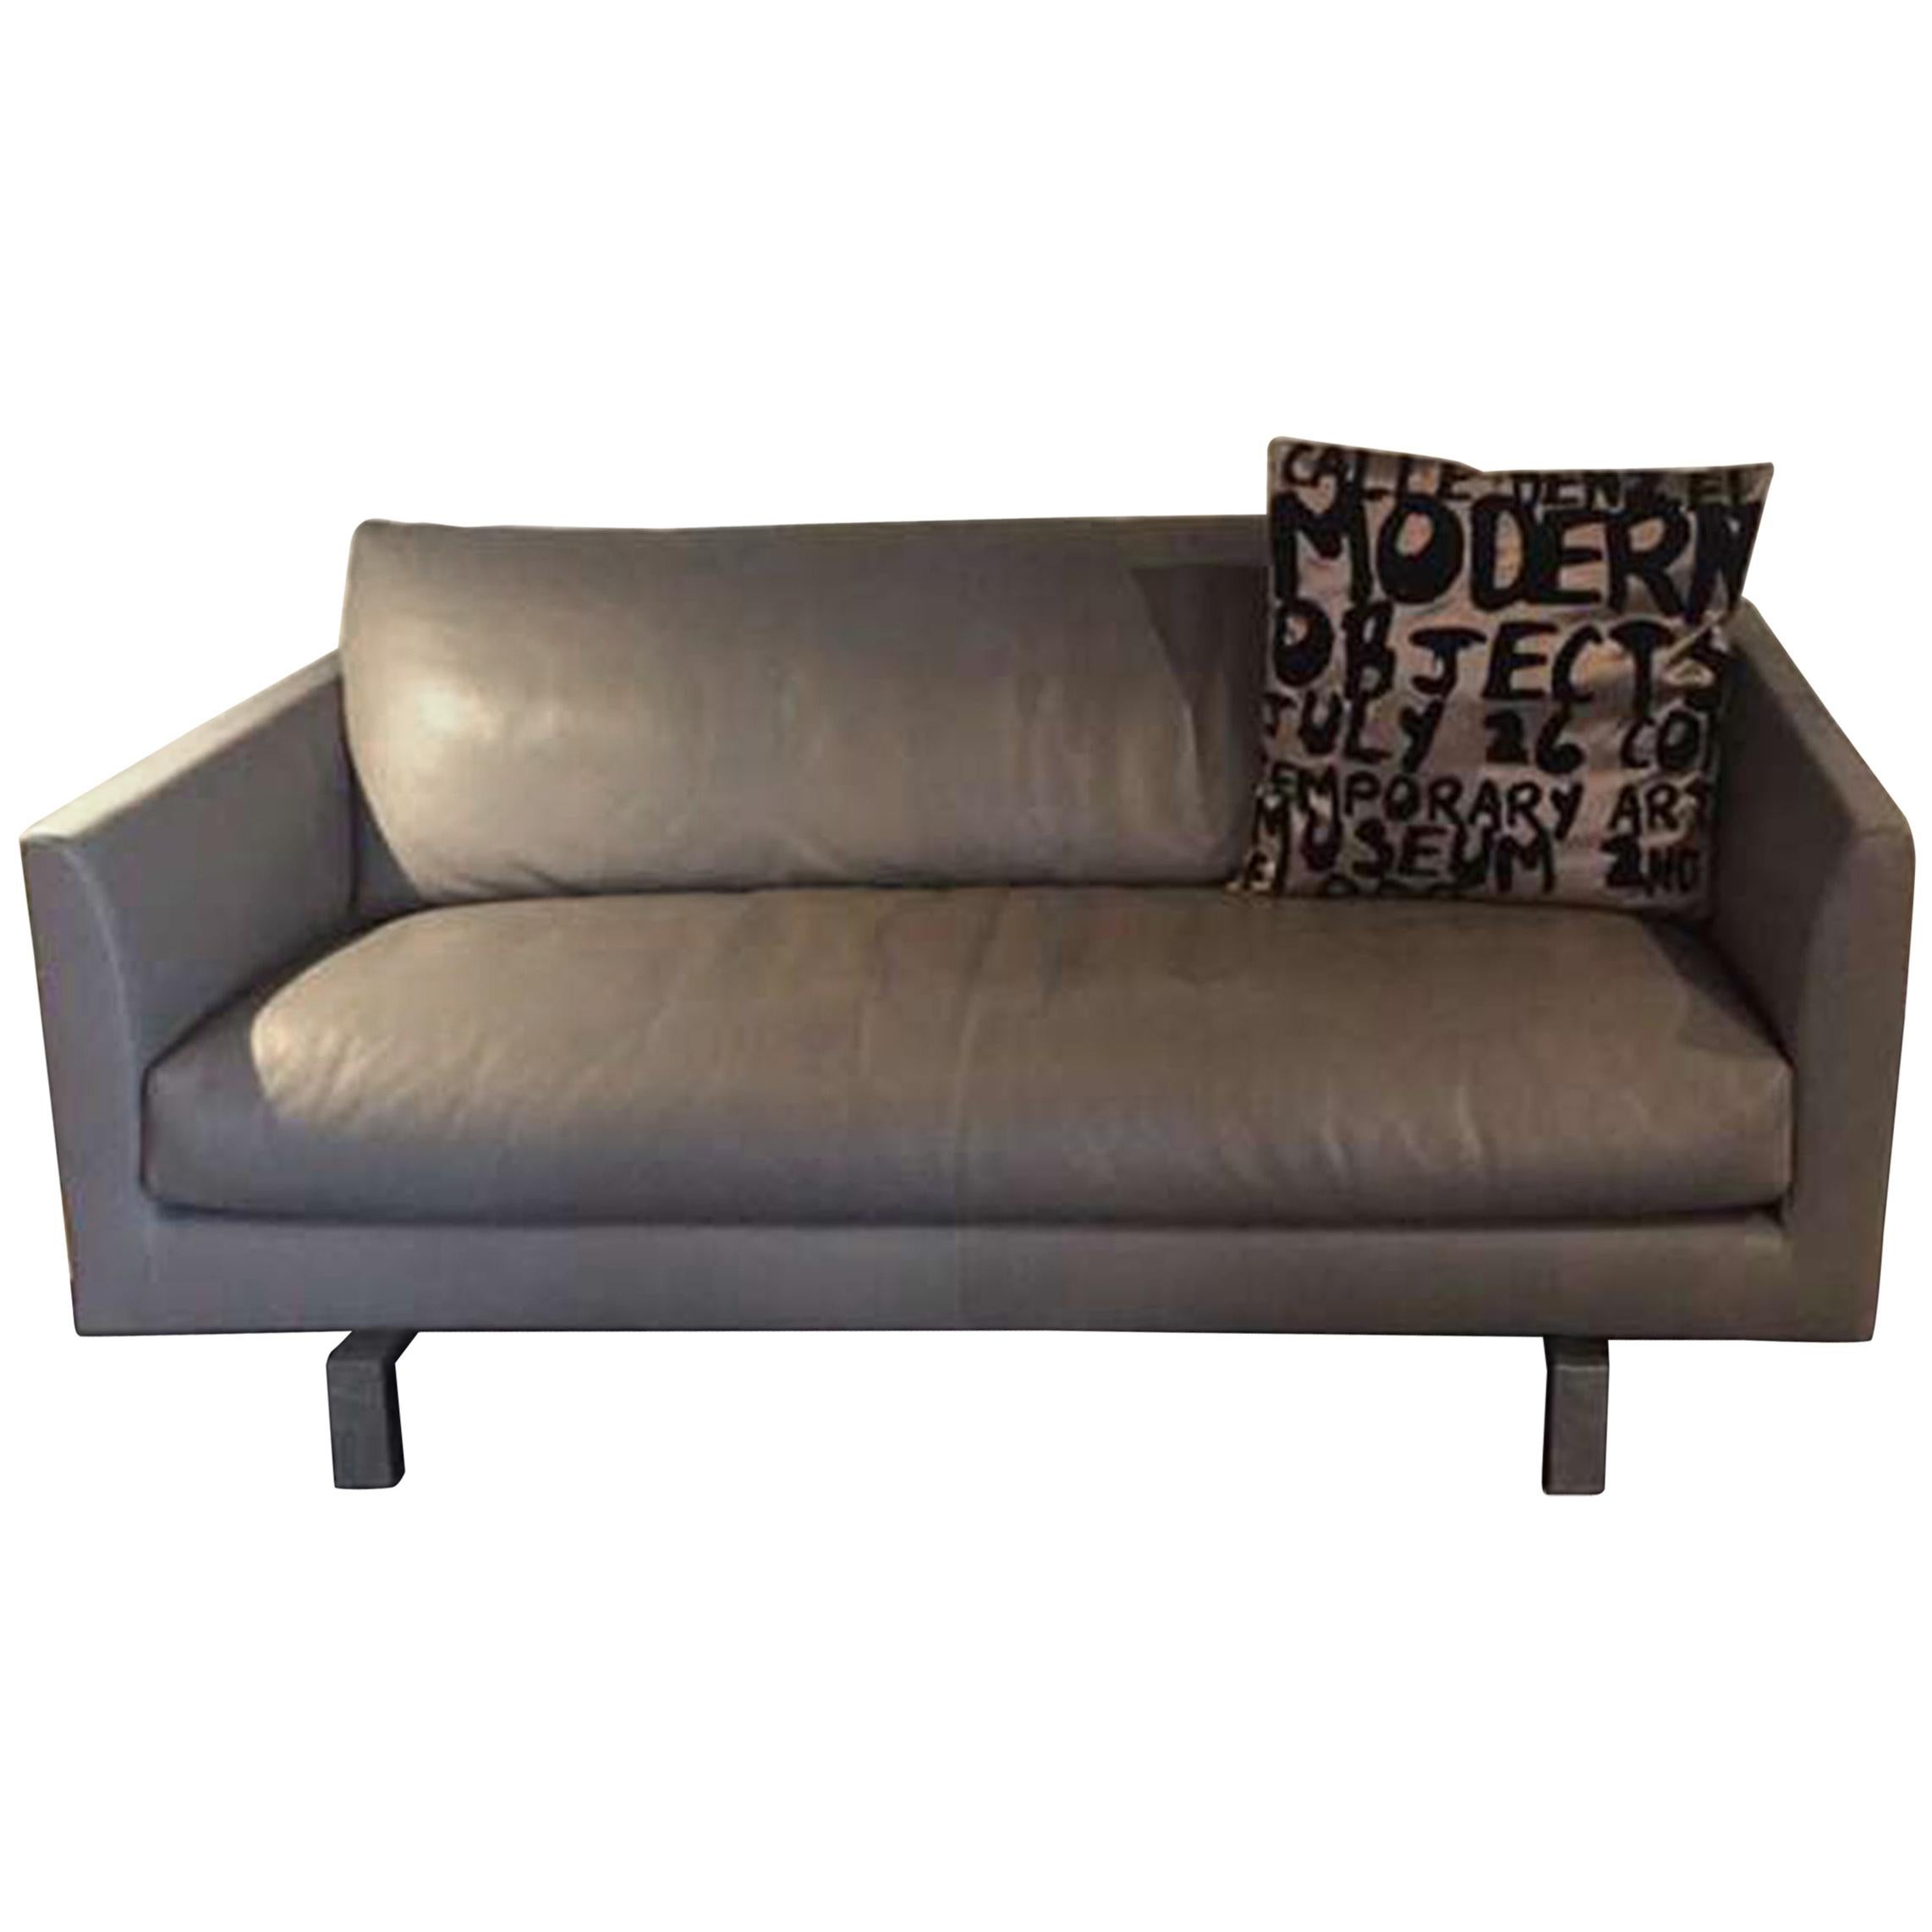 Montis Axel - For Sale on 1stDibs | montis axel xl sale, montis axel sofa  price, sofa with attached side table